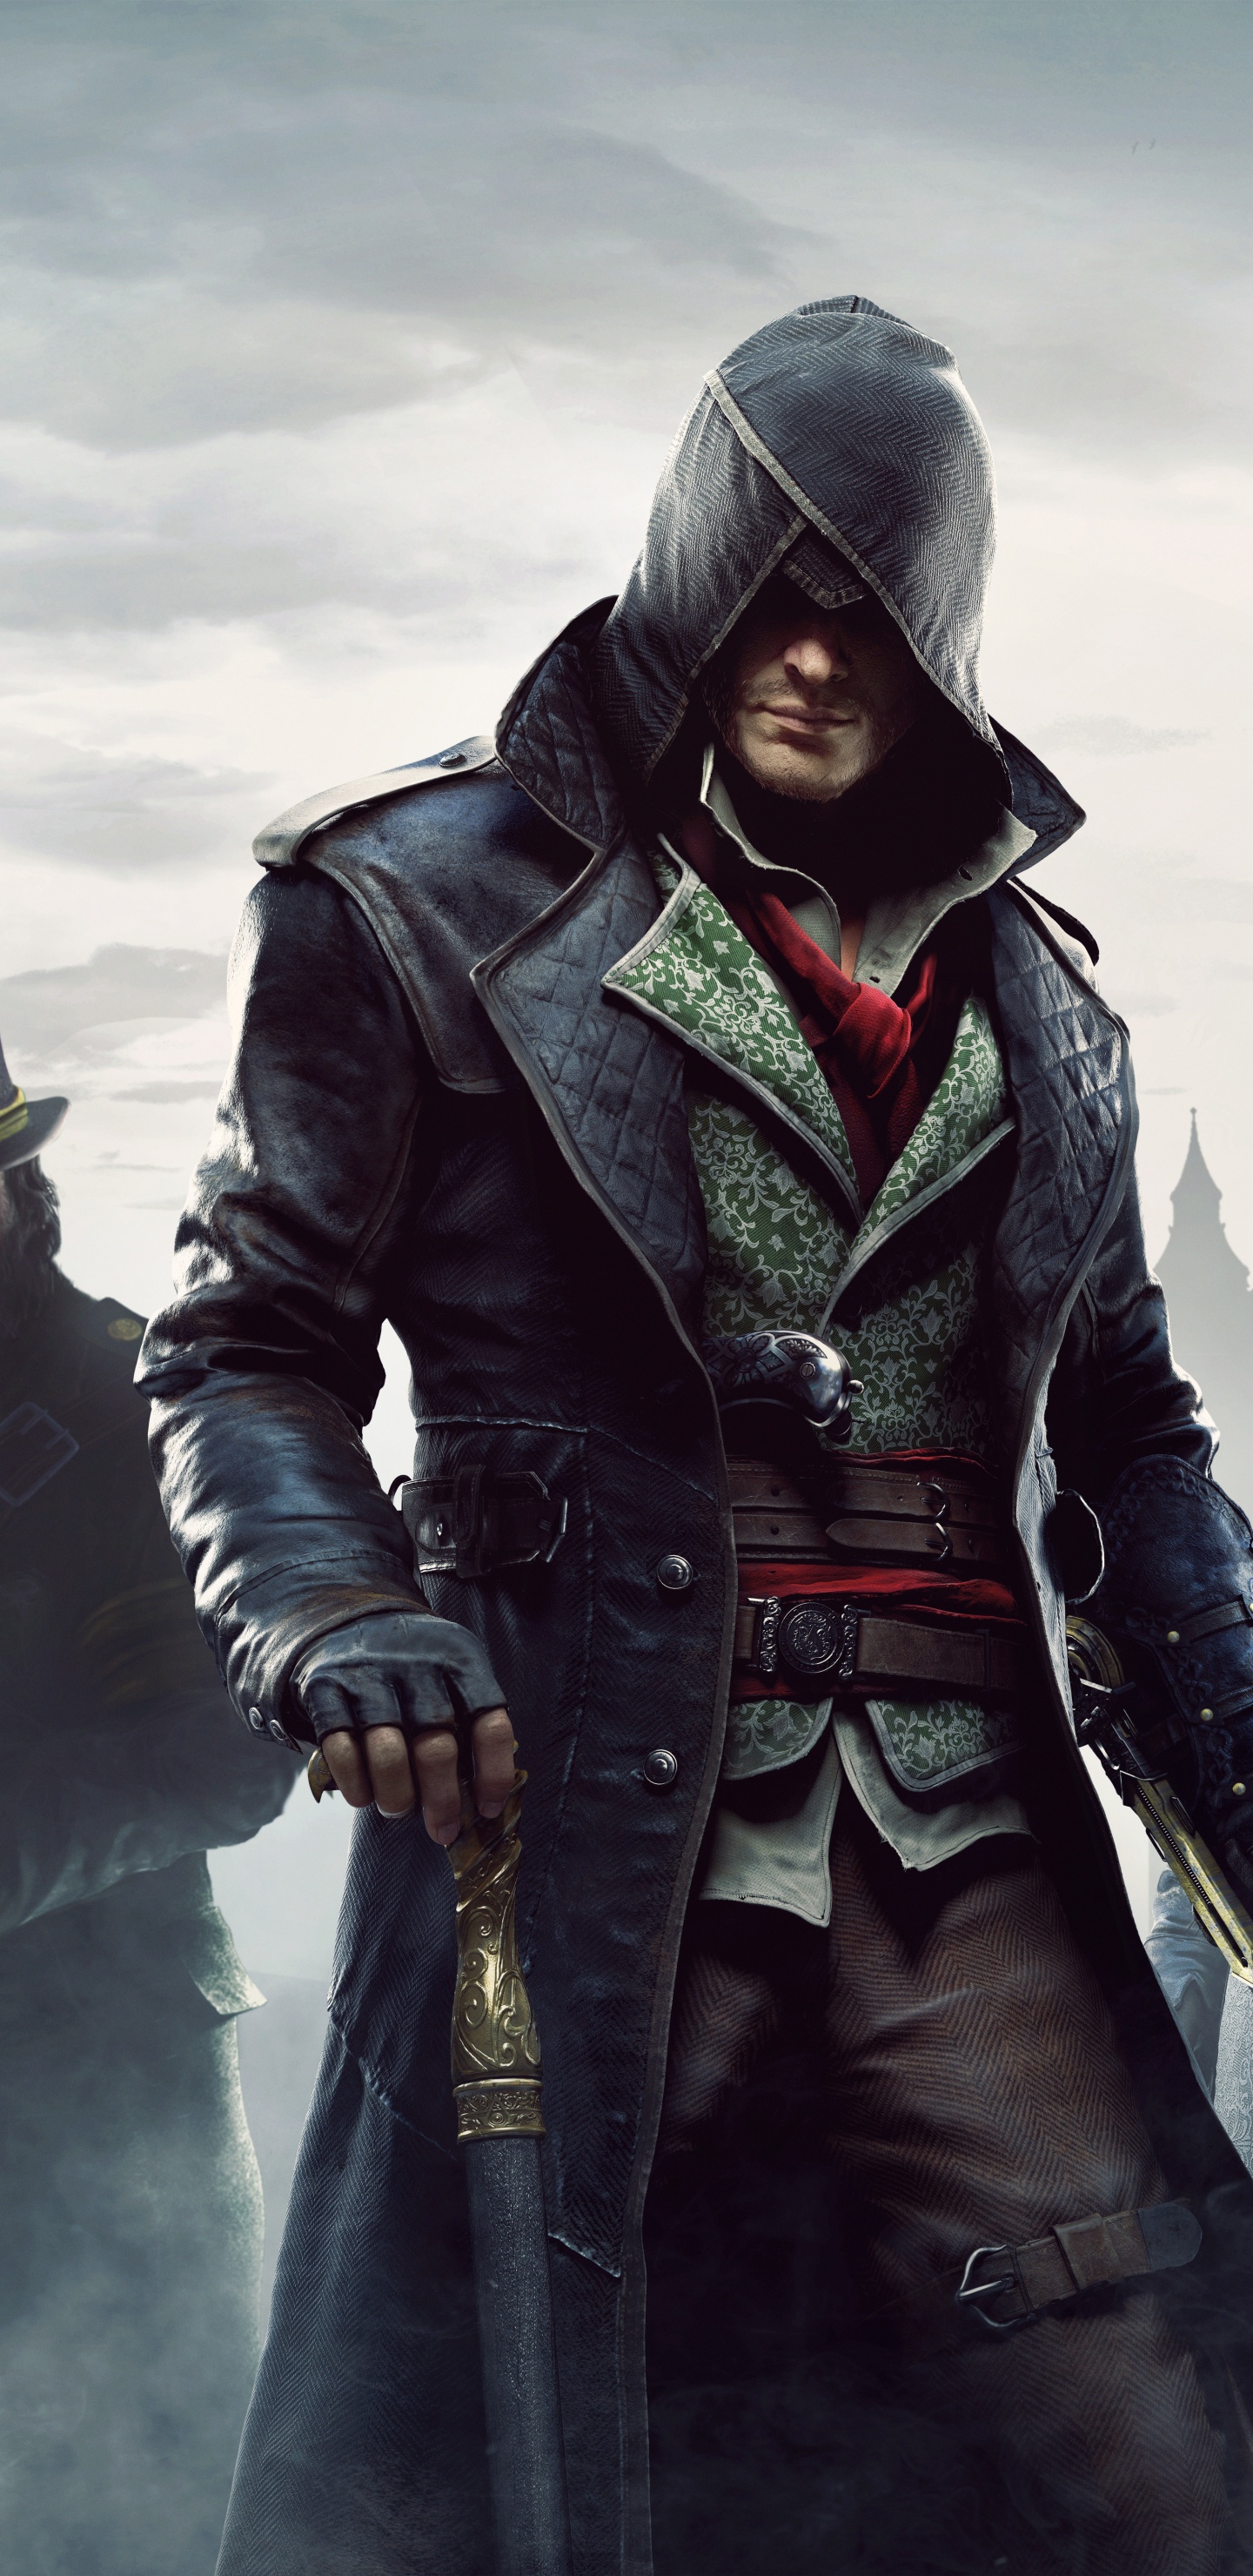 Assassins Creed Syndicate, Ubisoft, pc Game, Film, Assassins Creed Unity. Wallpaper in 1440x2960 Resolution